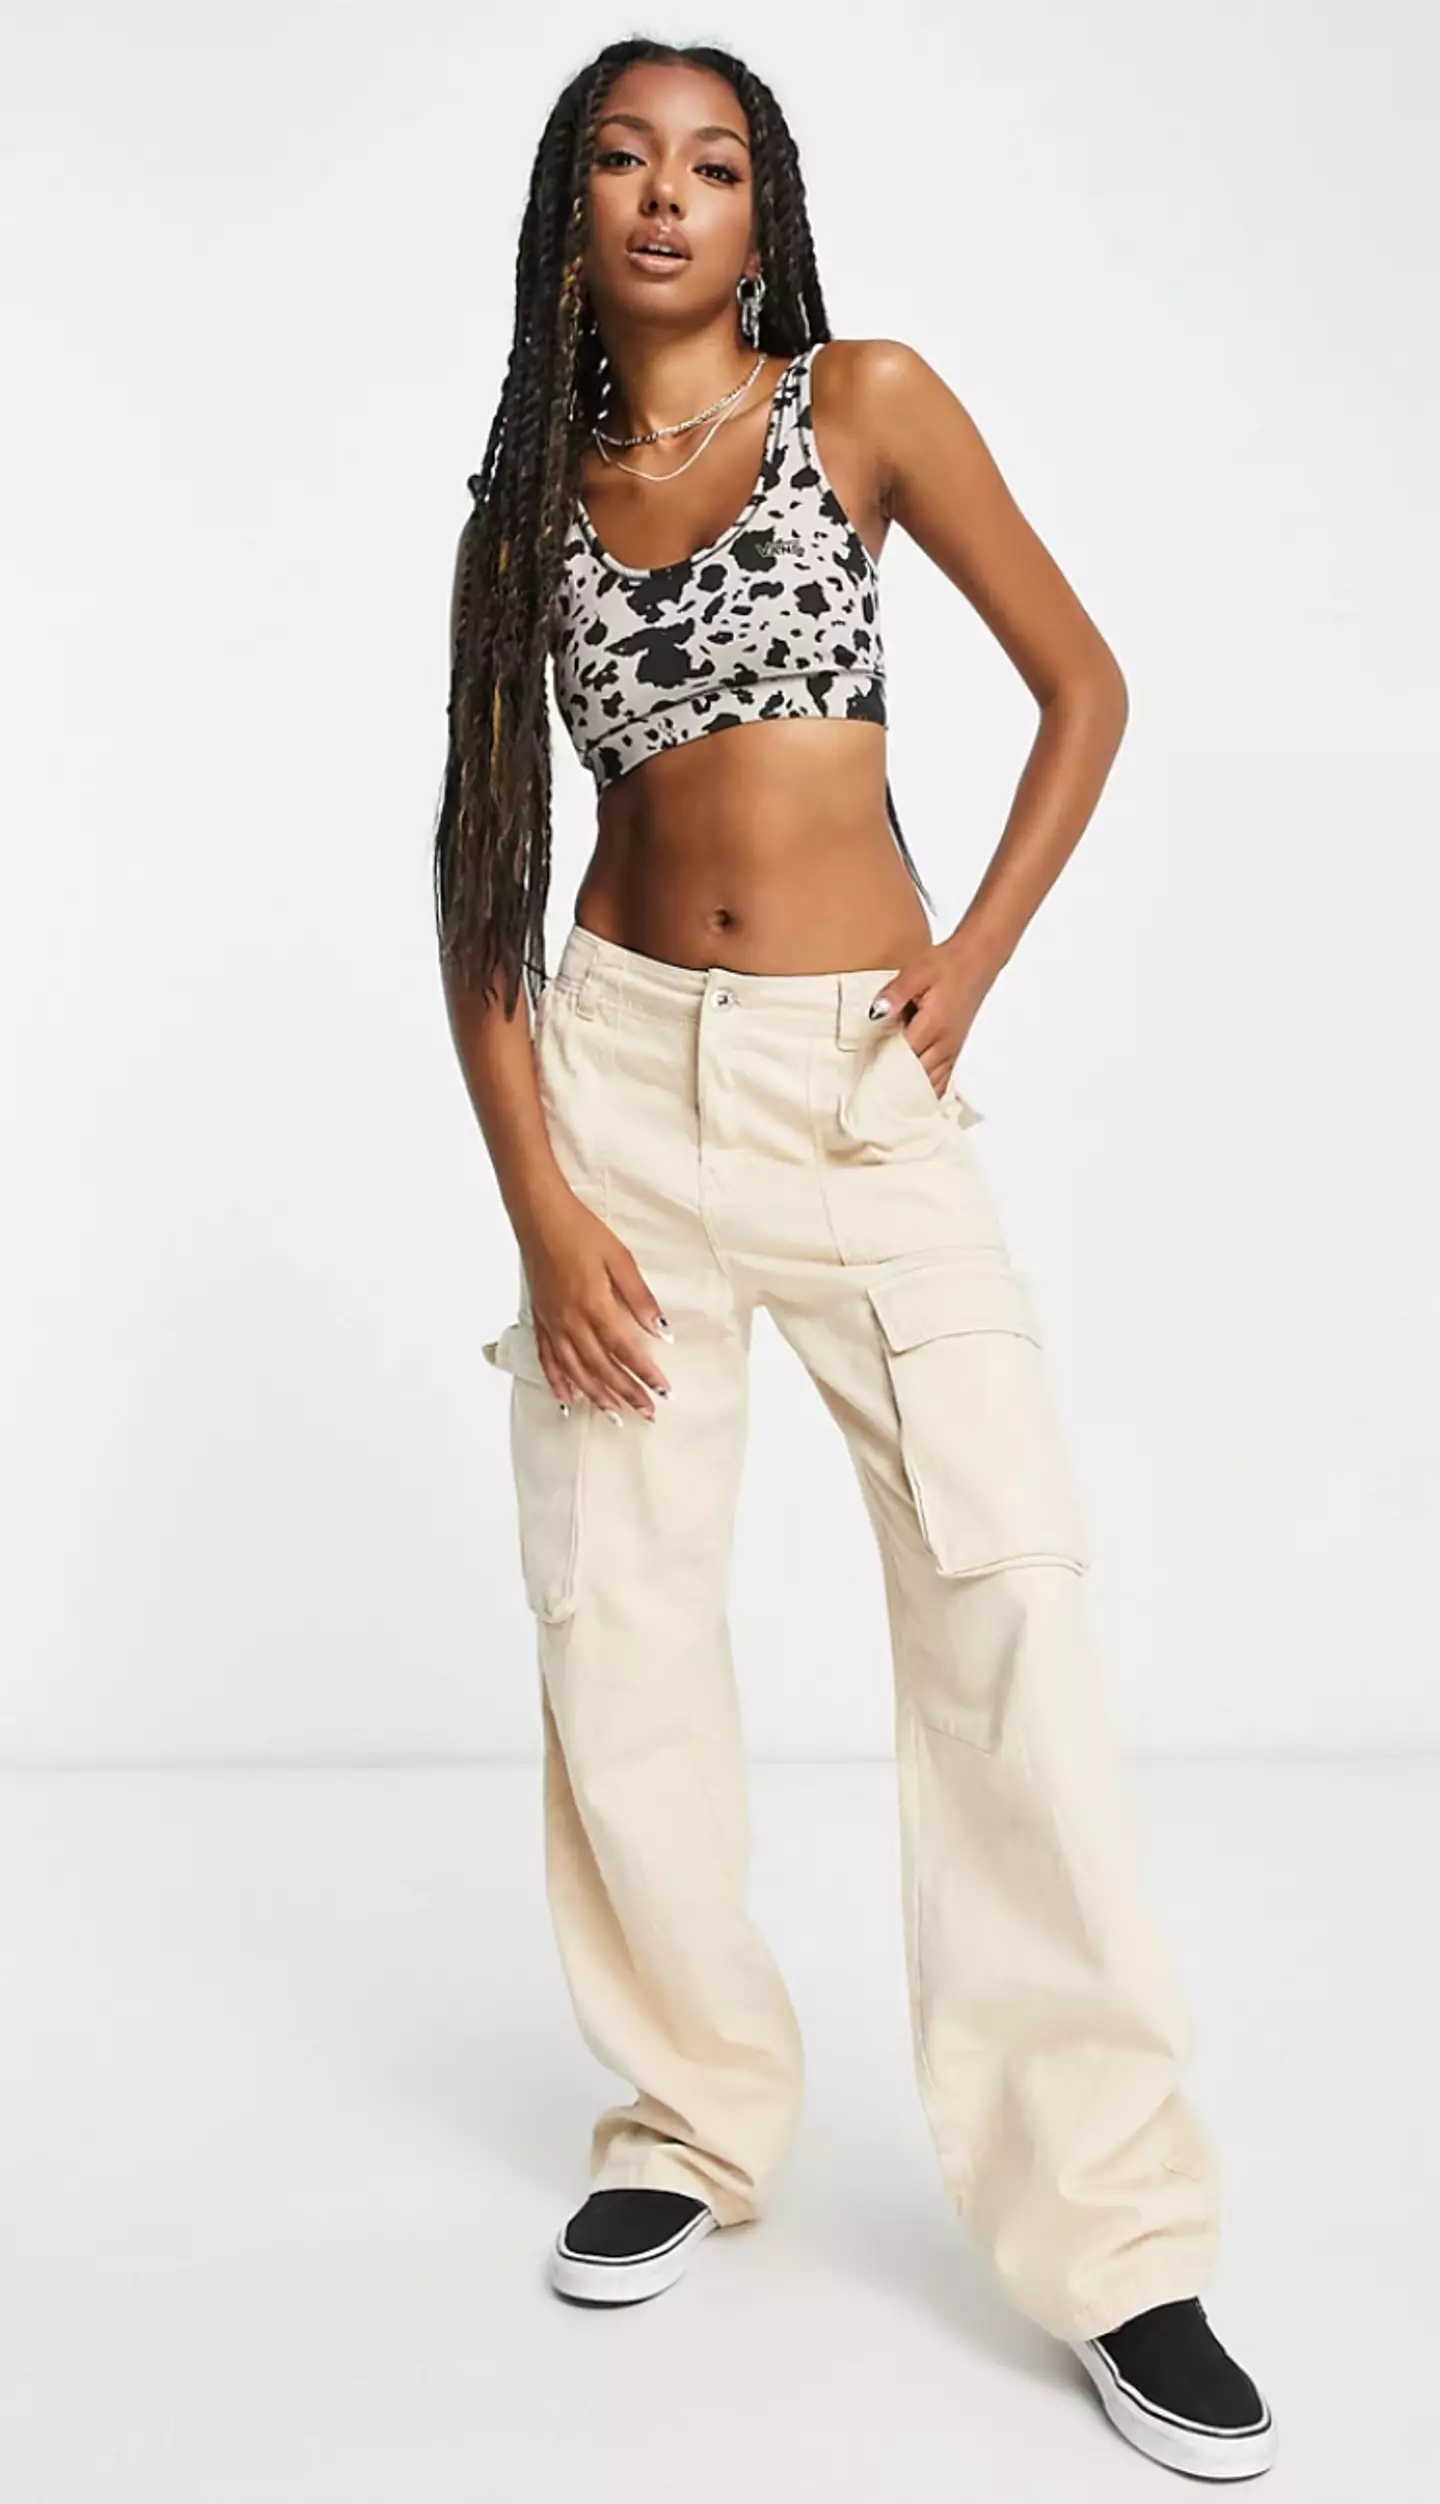 ASOS is being praised for showing a model with a scoliosis scar on a recent campaign.